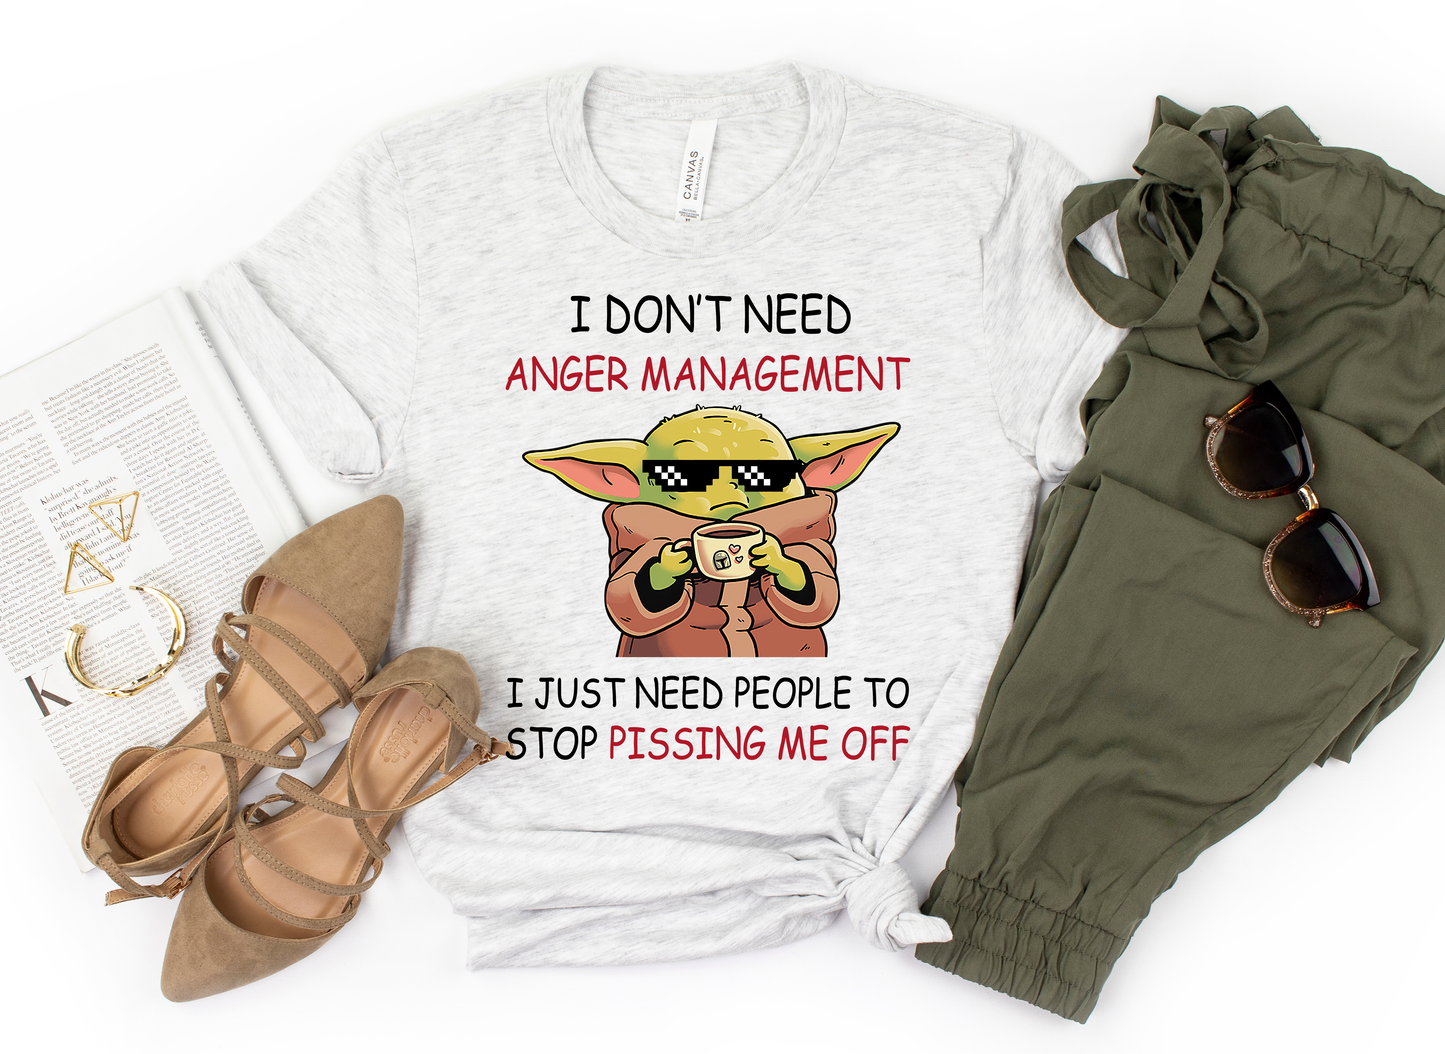 ANGER MANAGEMENT TEE